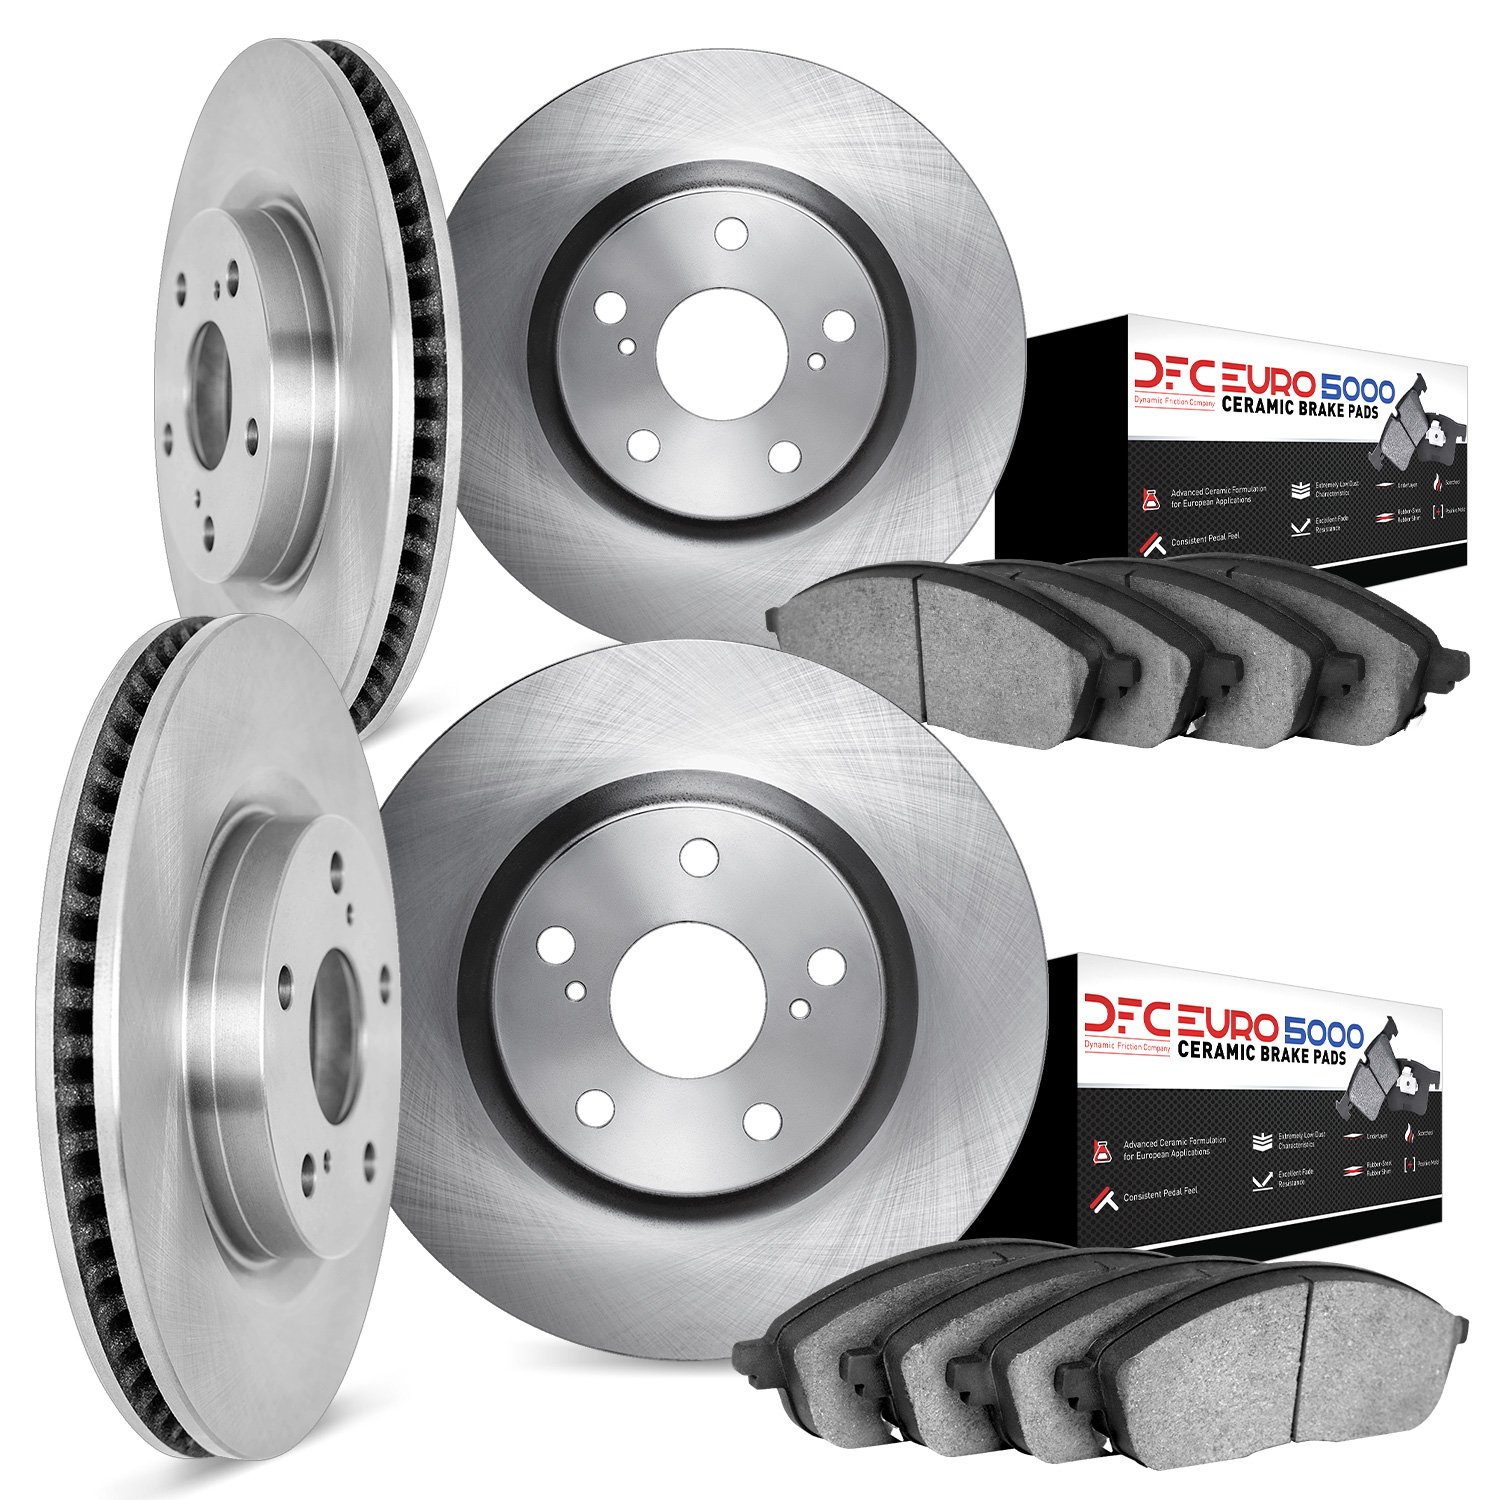 6604-11416 Brake Rotors w/5000 Euro Ceramic Brake Pads, 2007-2015 Volvo, Position: Front and Rear